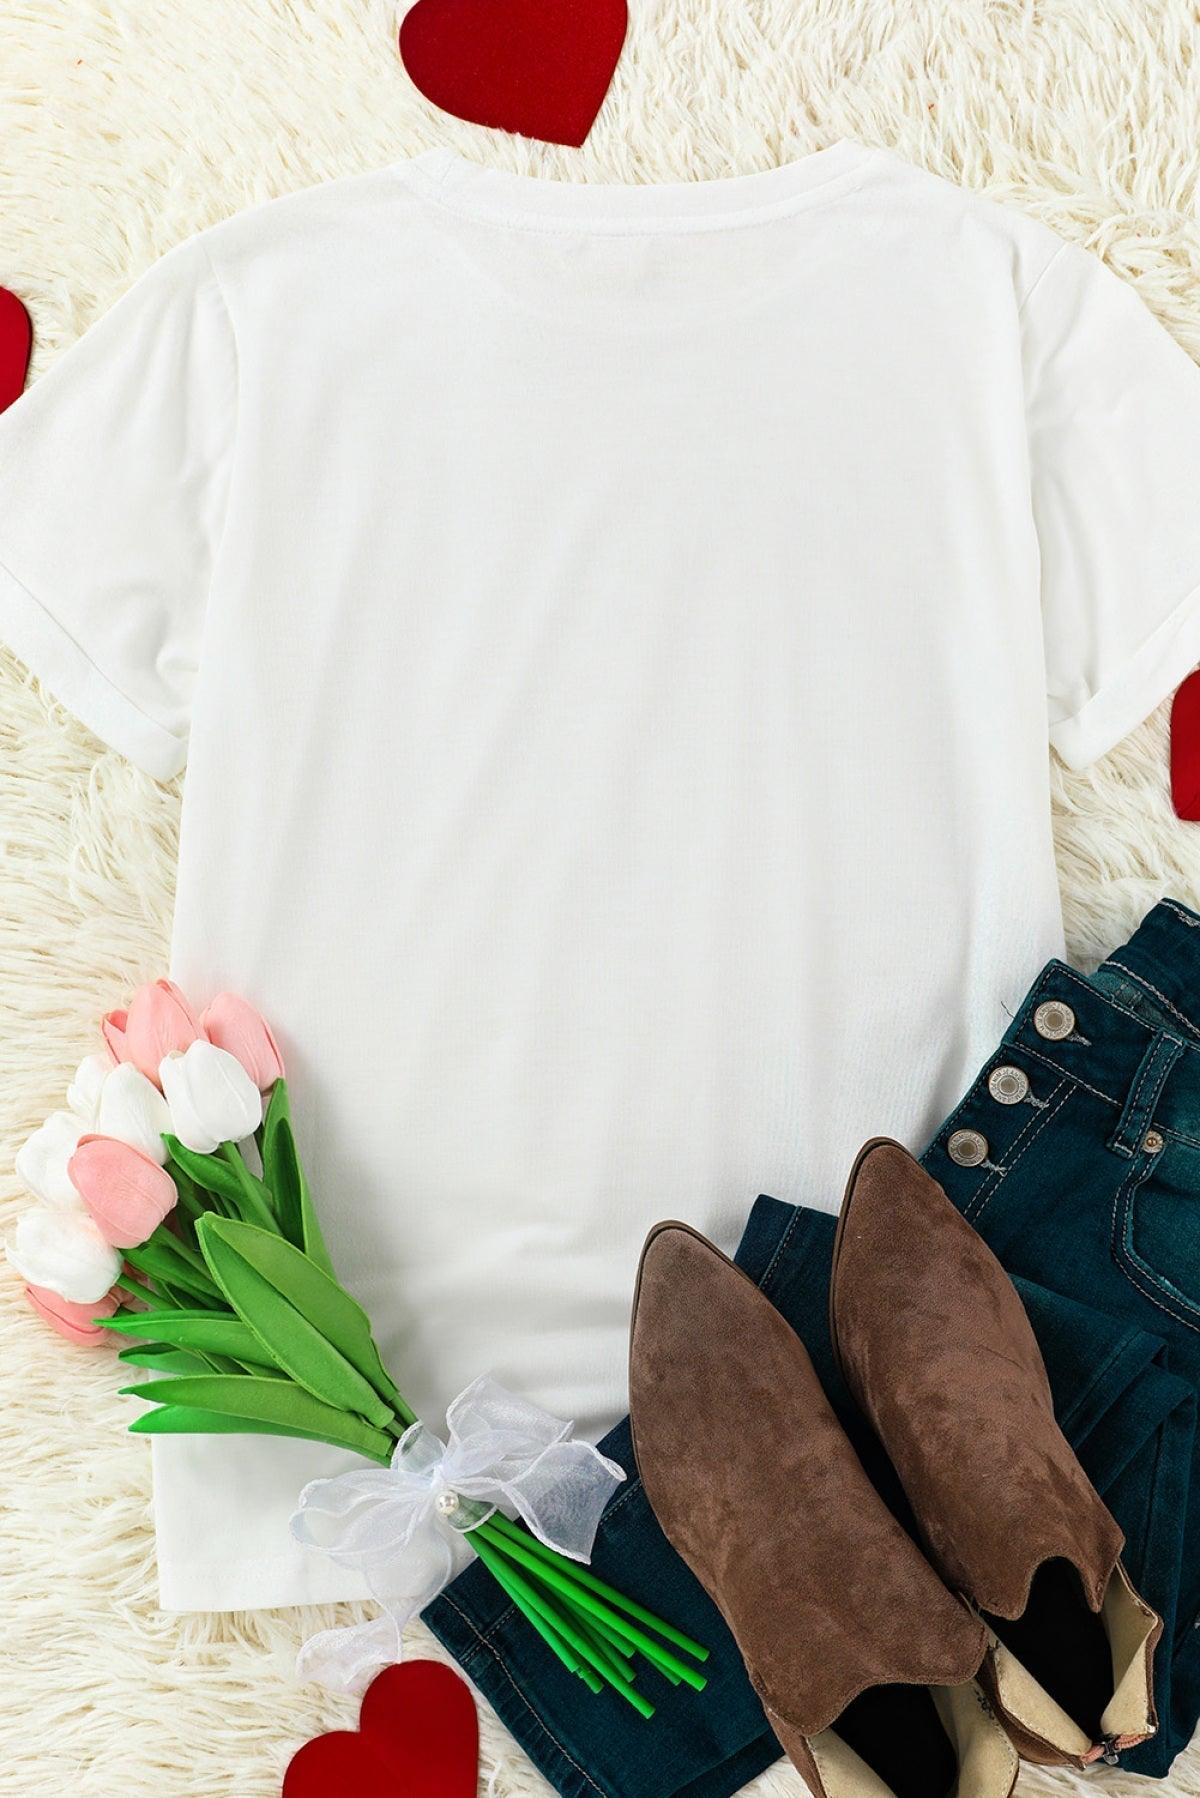 Ladies White T-Shirt with Red Glitter Heart